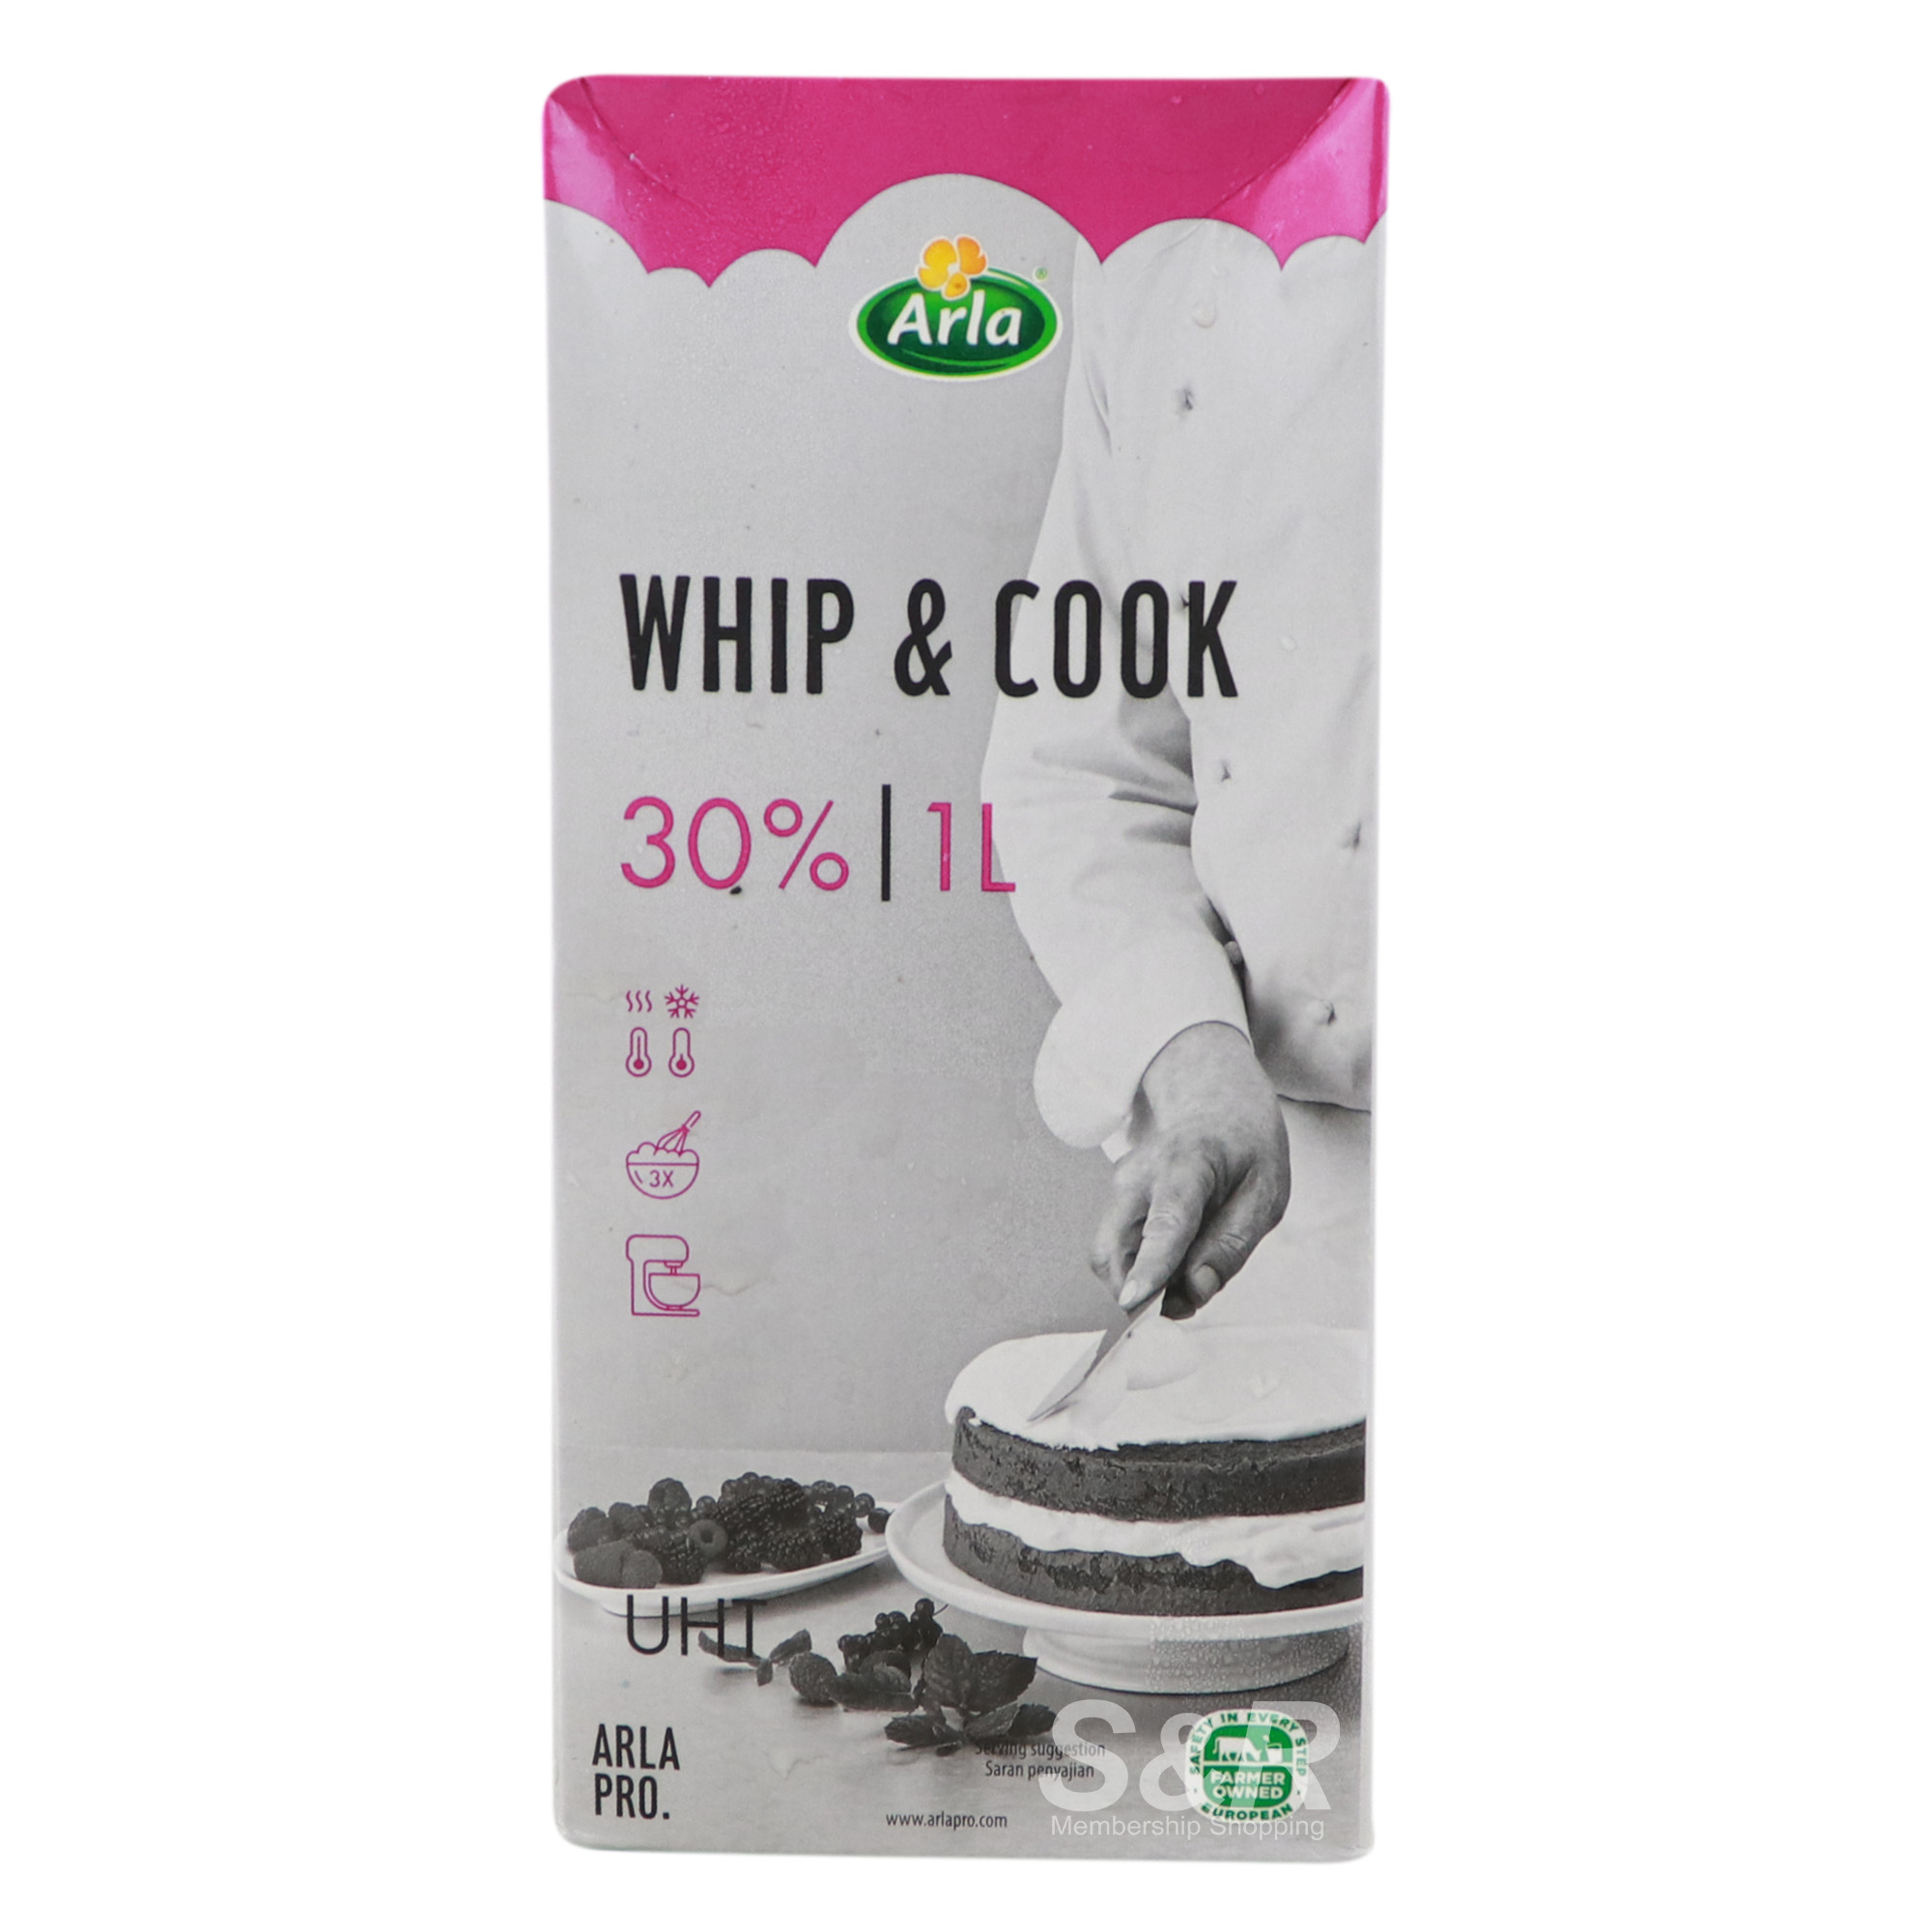 Arla Pro Whip and Cook 1L